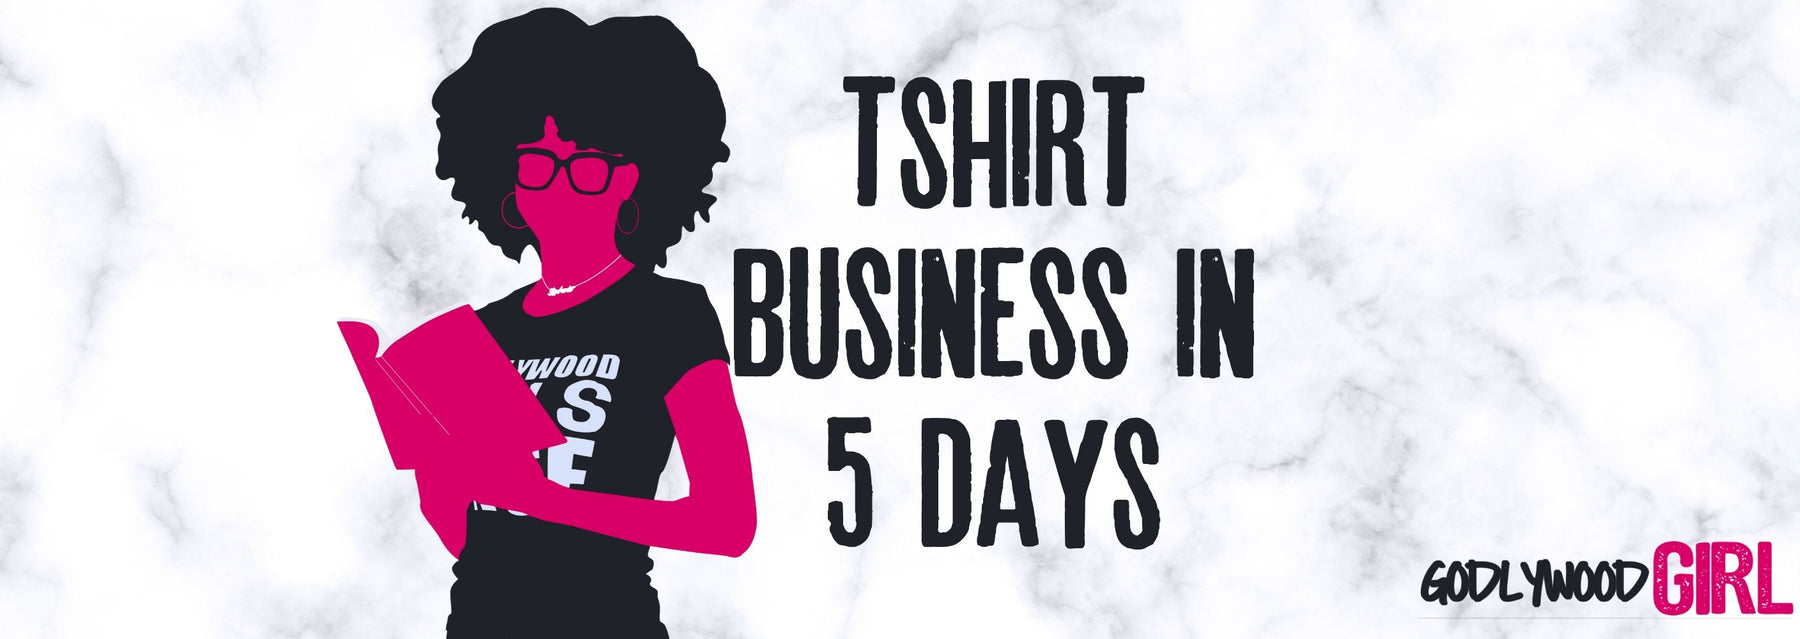 How To Start A TShirt Business Online In 5 Days Or Less